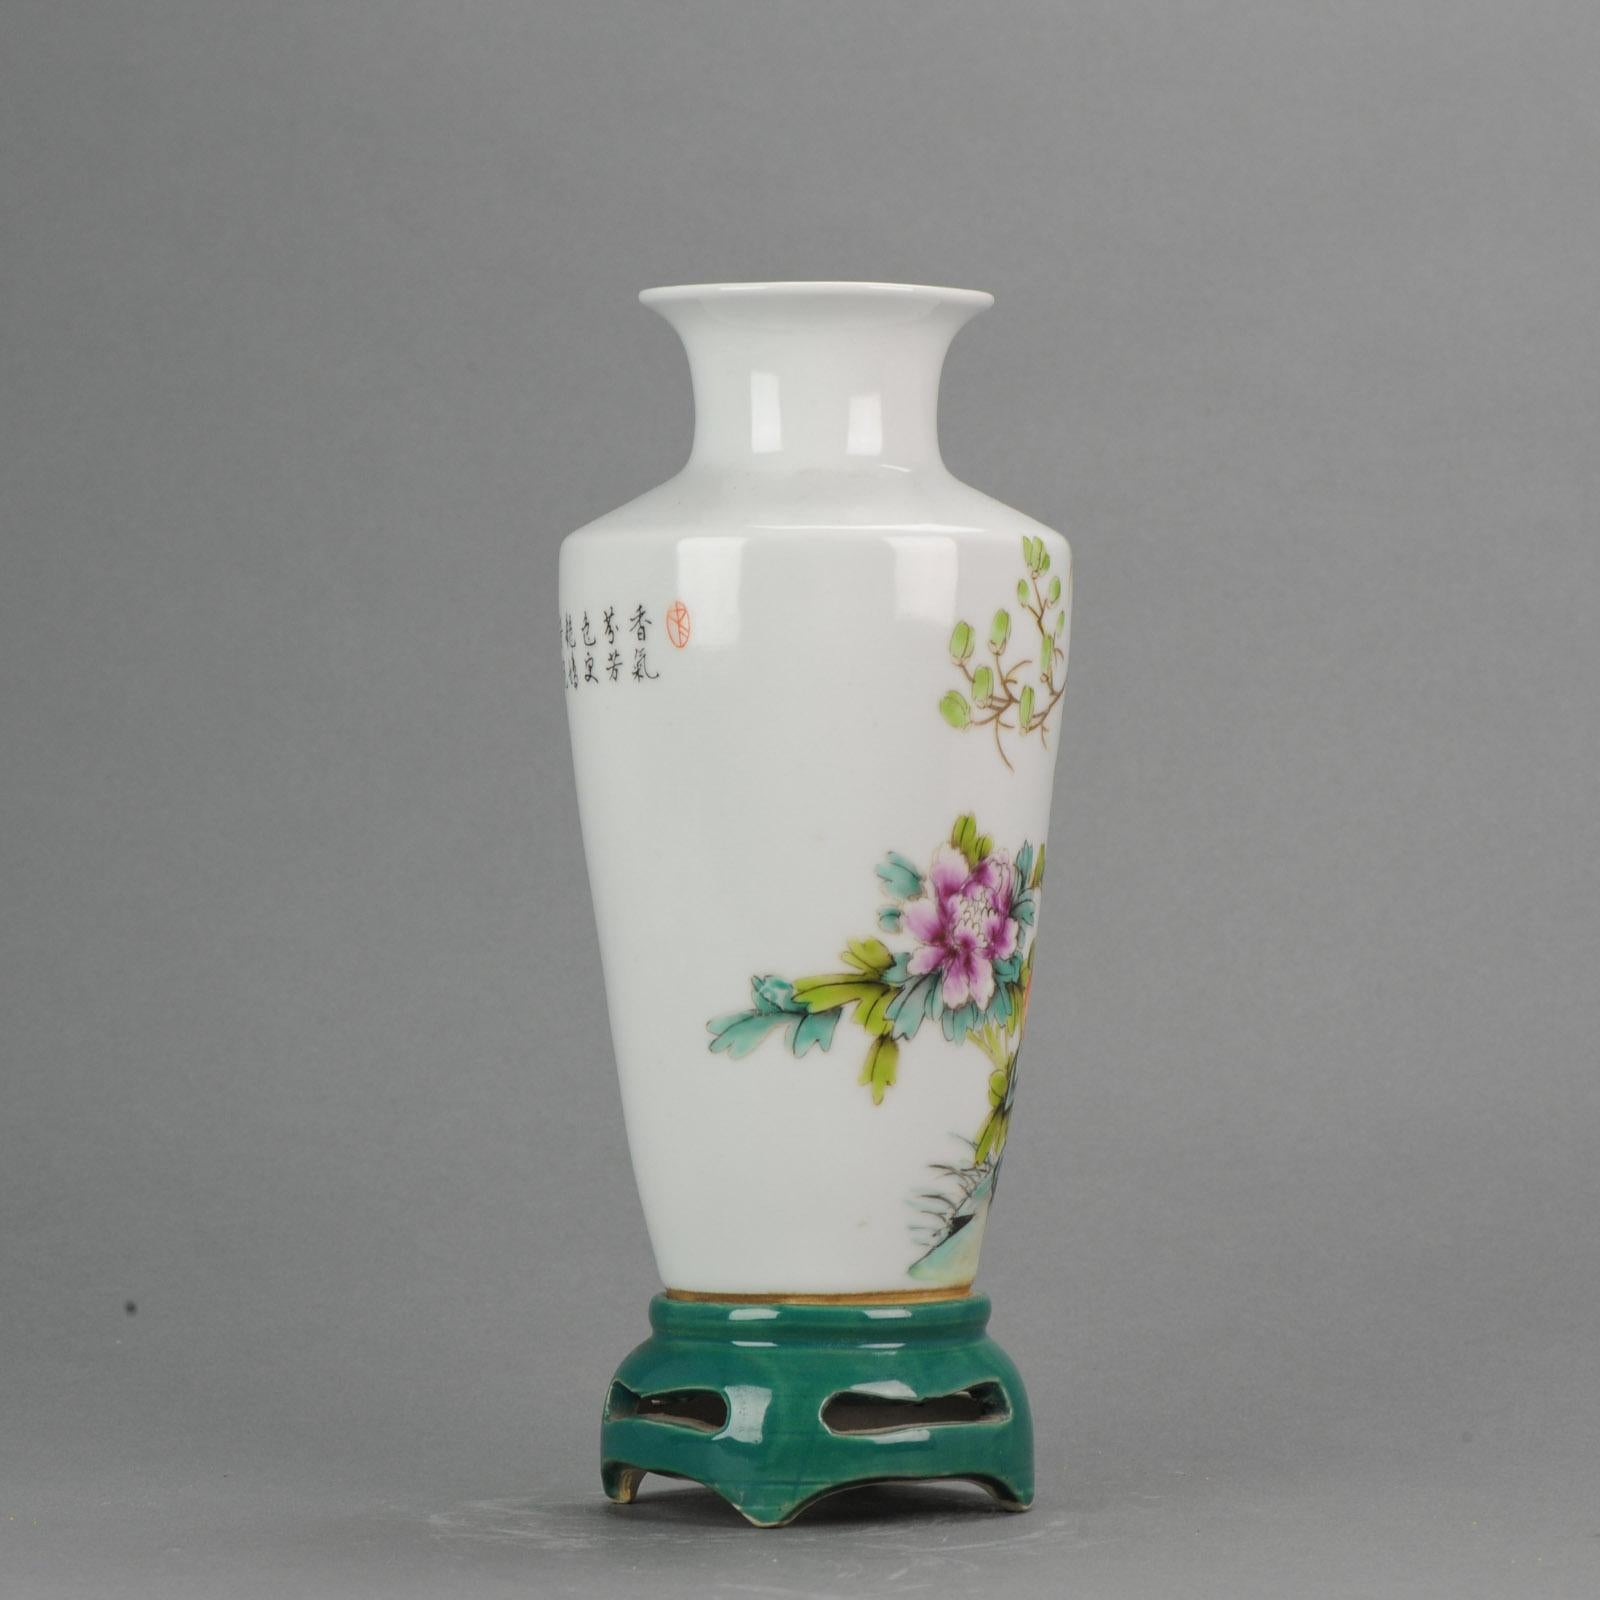 A very nicely decorated Vase with a scene of roosters in a garden.

The is a special vase, The vase is 'loose' from the green standard. Not really loose but has a little room to move (check pictures). Not sure what the purpose of this is but it's